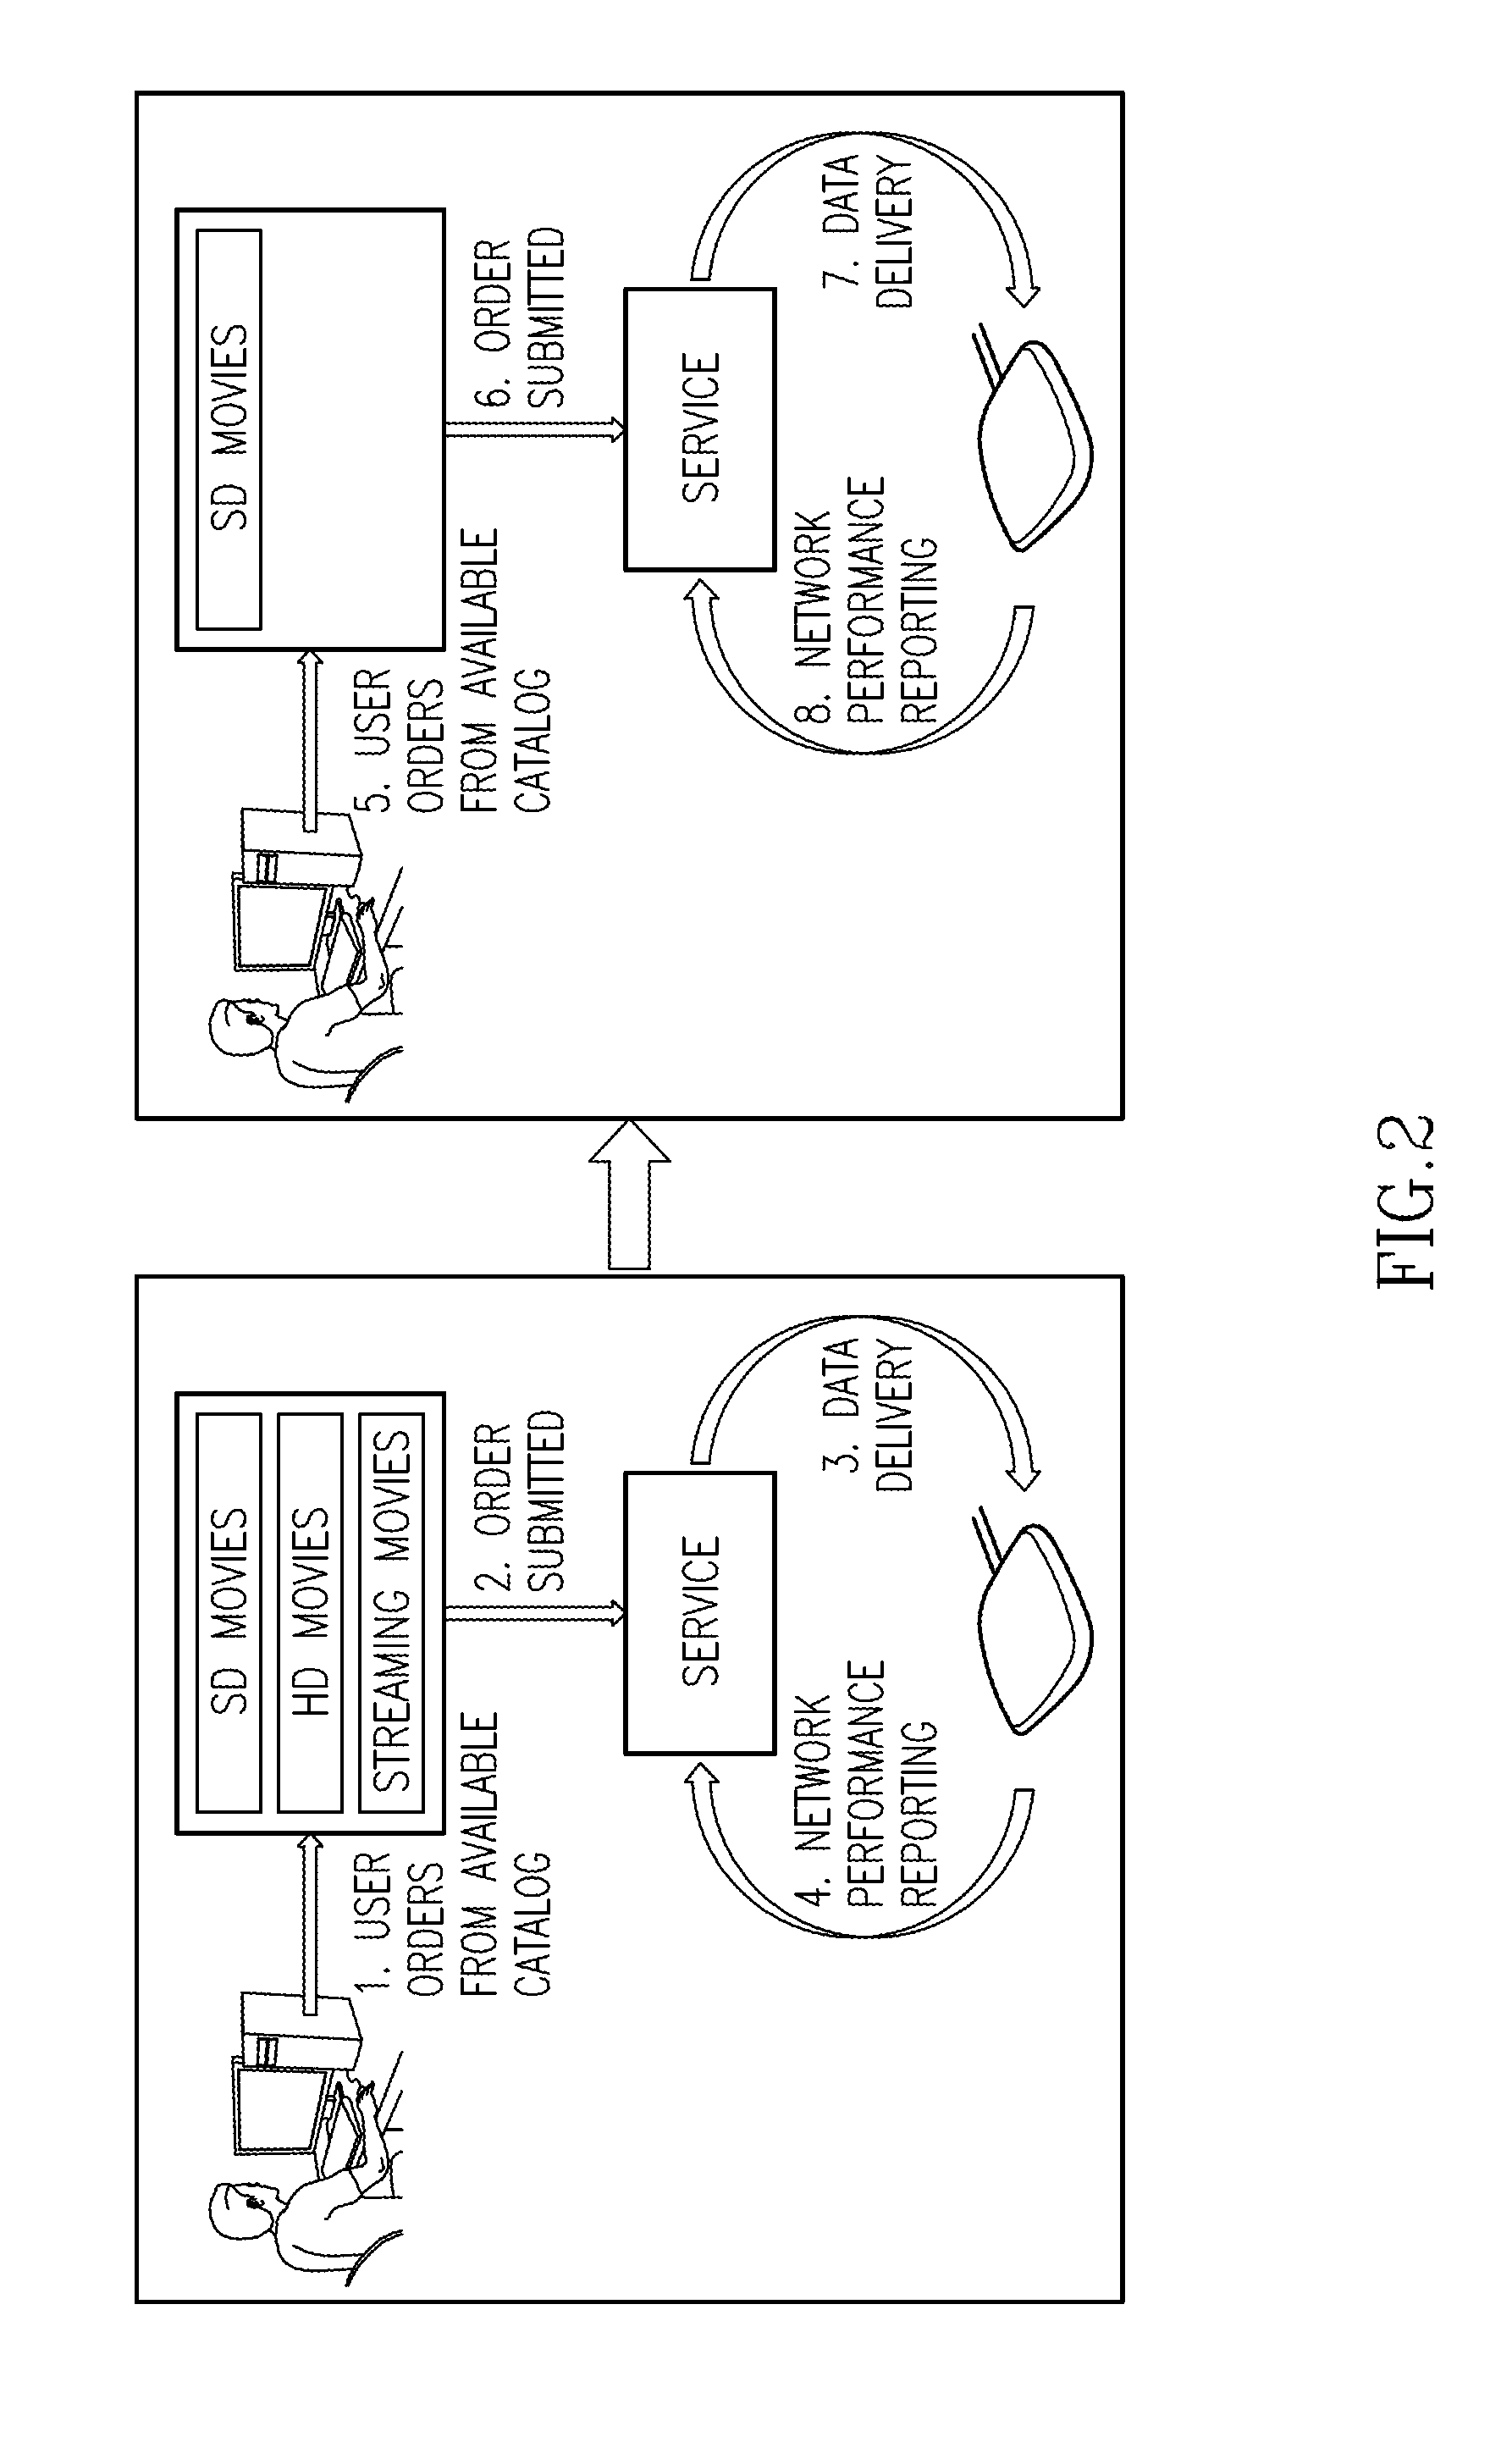 System and method for dynamic service offering based on available resources